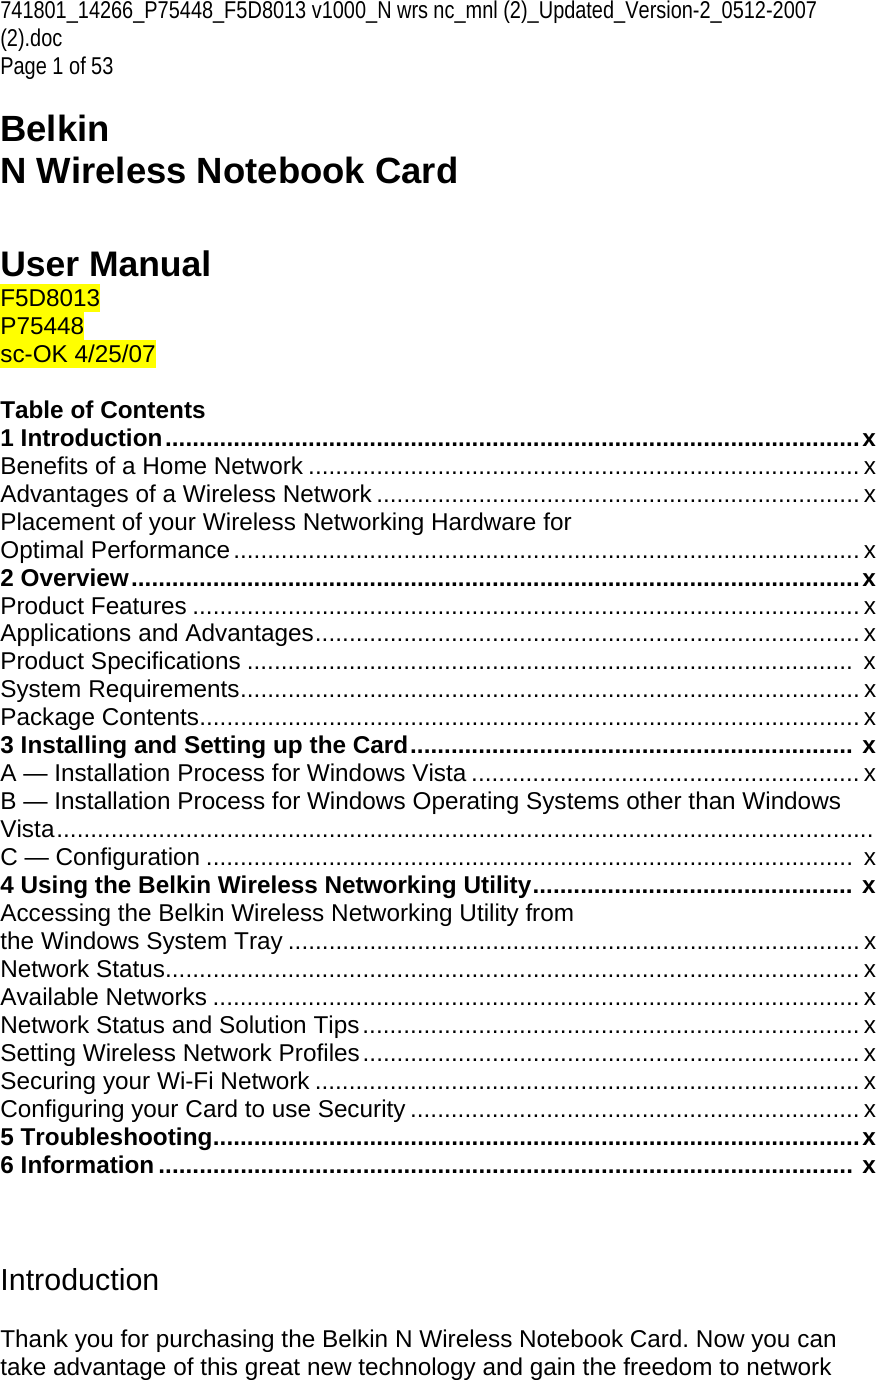 741801_14266_P75448_F5D8013 v1000_N wrs nc_mnl (2)_Updated_Version-2_0512-2007 (2).doc Page 1 of 53  Belkin  N Wireless Notebook Card   User Manual F5D8013 P75448 sc-OK 4/25/07  Table of Contents 1 Introduction......................................................................................................x Benefits of a Home Network ................................................................................. x Advantages of a Wireless Network ....................................................................... x Placement of your Wireless Networking Hardware for  Optimal Performance............................................................................................ x 2 Overview...........................................................................................................x Product Features .................................................................................................. x Applications and Advantages................................................................................ x Product Specifications .........................................................................................  x System Requirements........................................................................................... x Package Contents................................................................................................. x 3 Installing and Setting up the Card................................................................. x A — Installation Process for Windows Vista ......................................................... x B — Installation Process for Windows Operating Systems other than Windows Vista........................................................................................................................ C — Configuration ...............................................................................................  x 4 Using the Belkin Wireless Networking Utility............................................... x Accessing the Belkin Wireless Networking Utility from  the Windows System Tray .................................................................................... x Network Status...................................................................................................... x Available Networks ............................................................................................... x Network Status and Solution Tips......................................................................... x Setting Wireless Network Profiles......................................................................... x Securing your Wi-Fi Network ................................................................................ x Configuring your Card to use Security .................................................................. x 5 Troubleshooting...............................................................................................x 6 Information ...................................................................................................... x    Introduction  Thank you for purchasing the Belkin N Wireless Notebook Card. Now you can take advantage of this great new technology and gain the freedom to network 